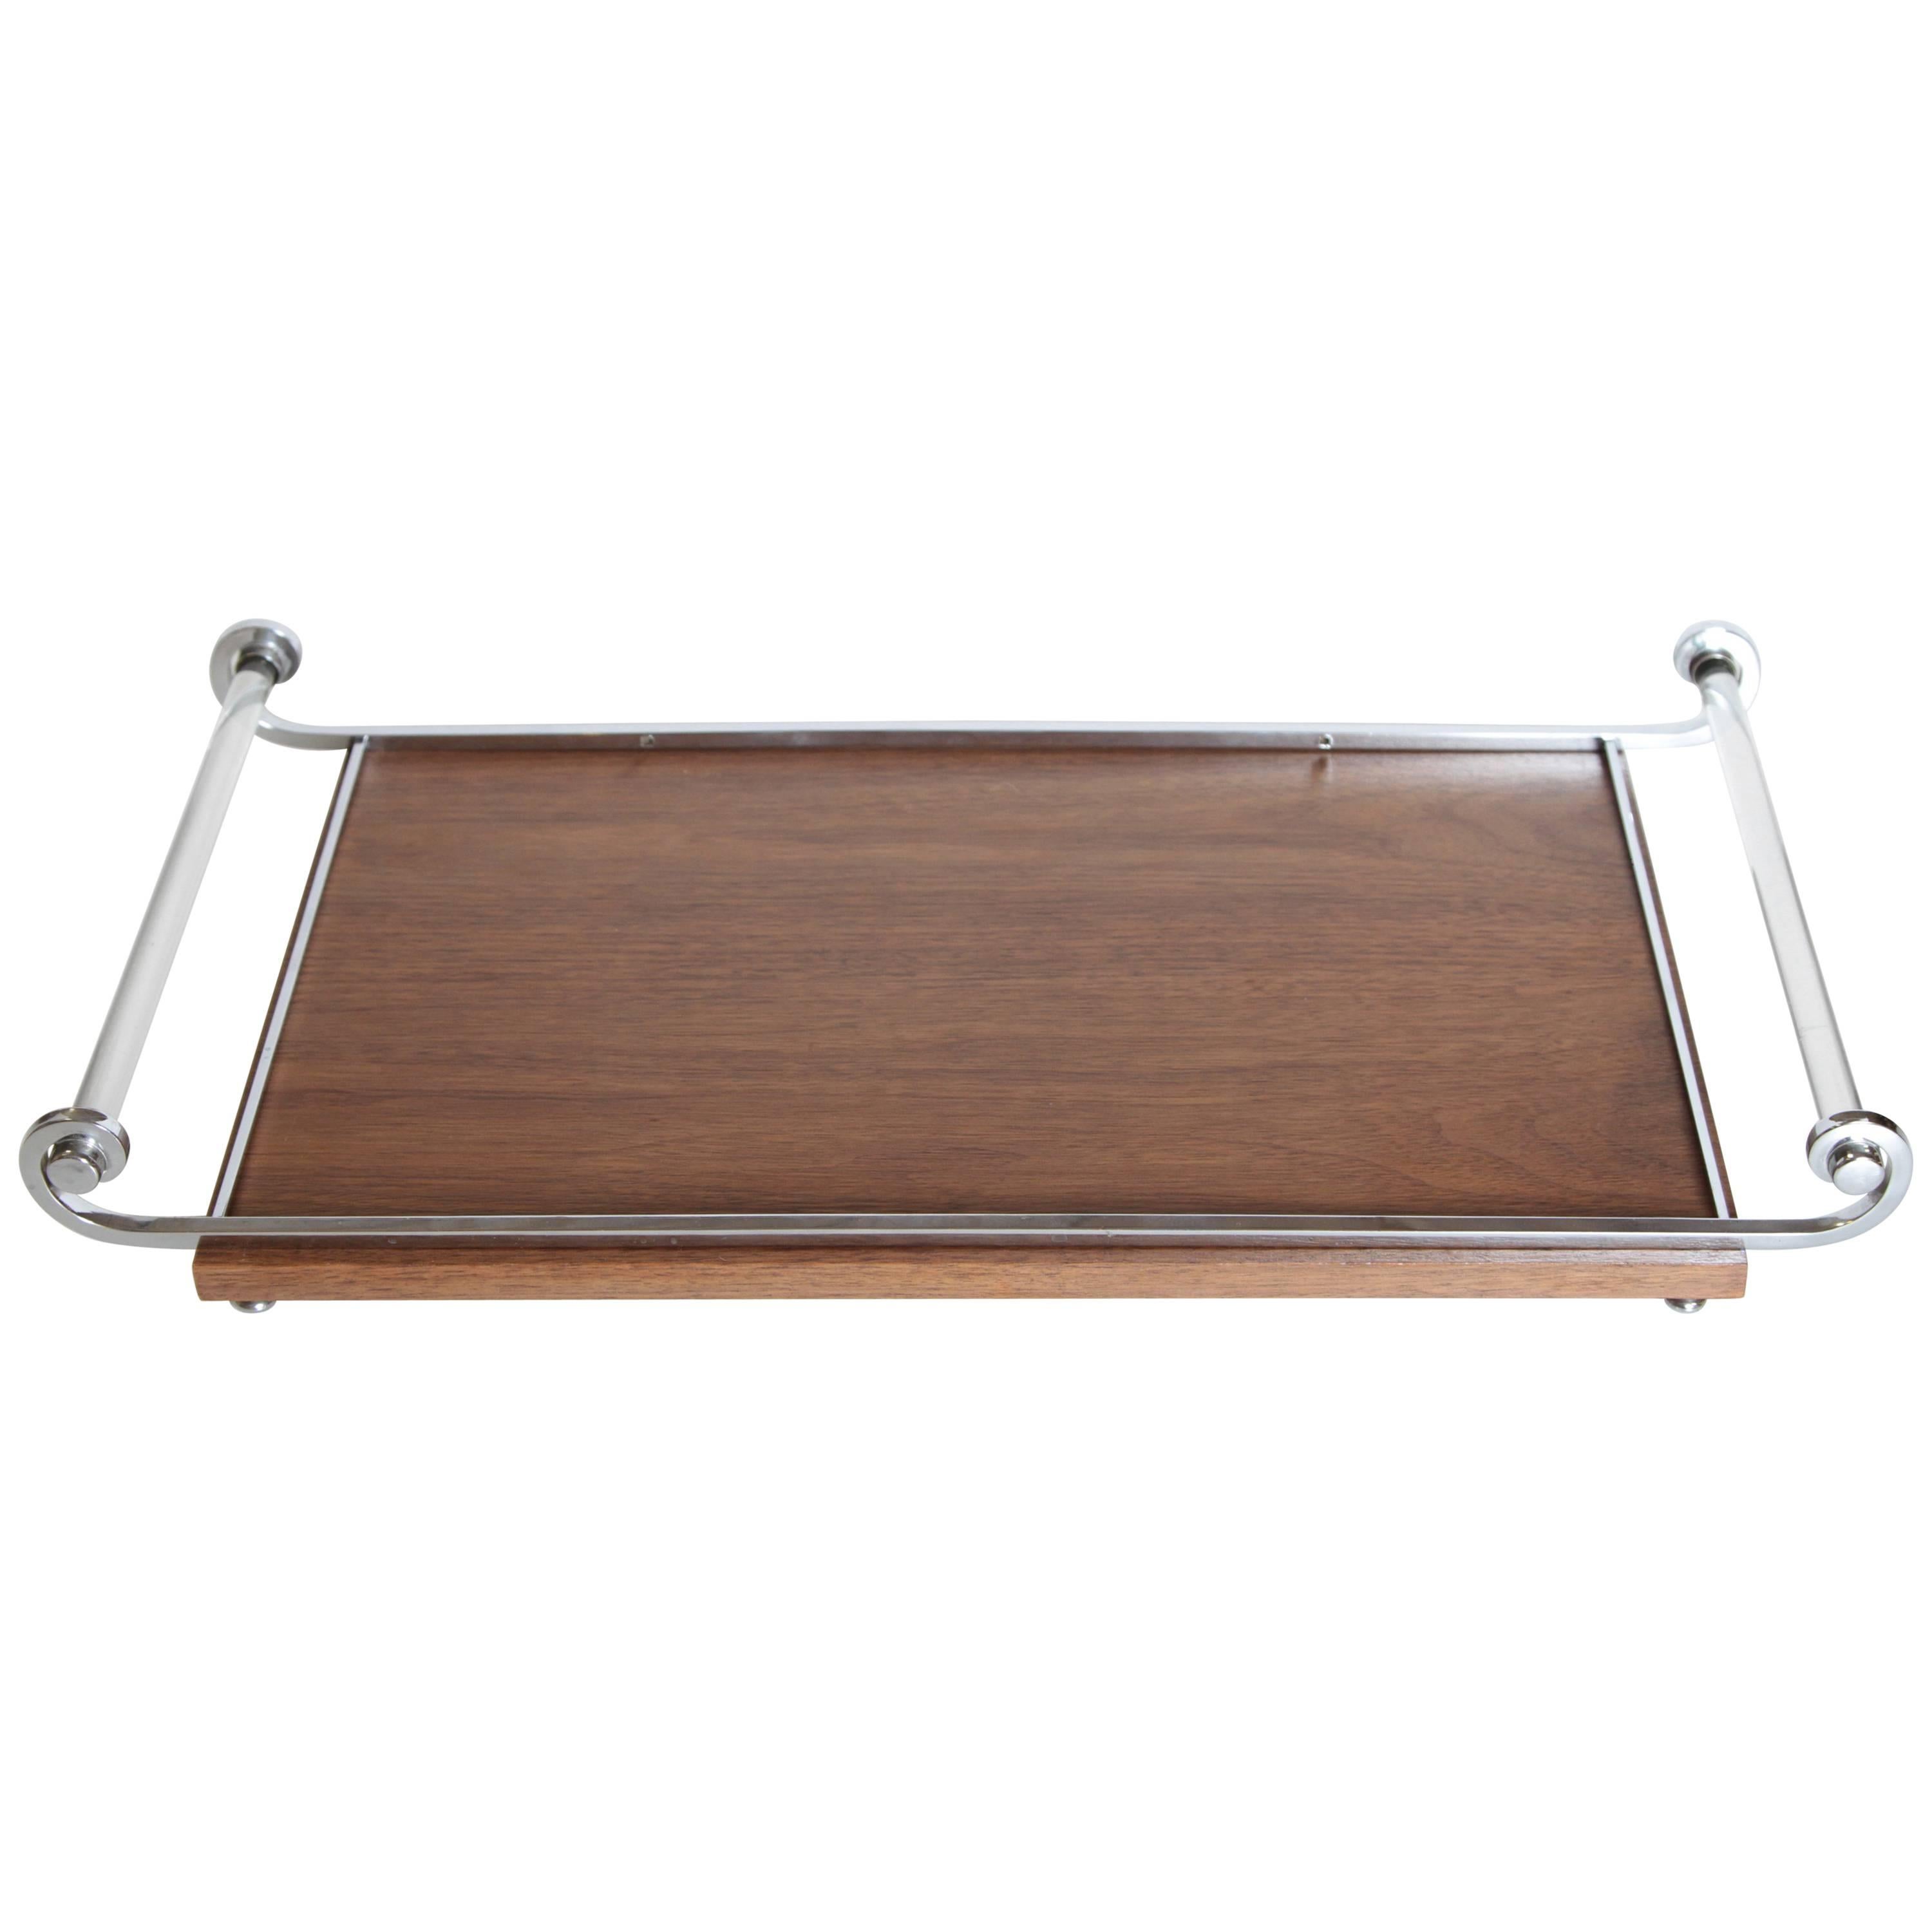 Machine Age Art Deco Cocktail Tray, Manner of James Amster